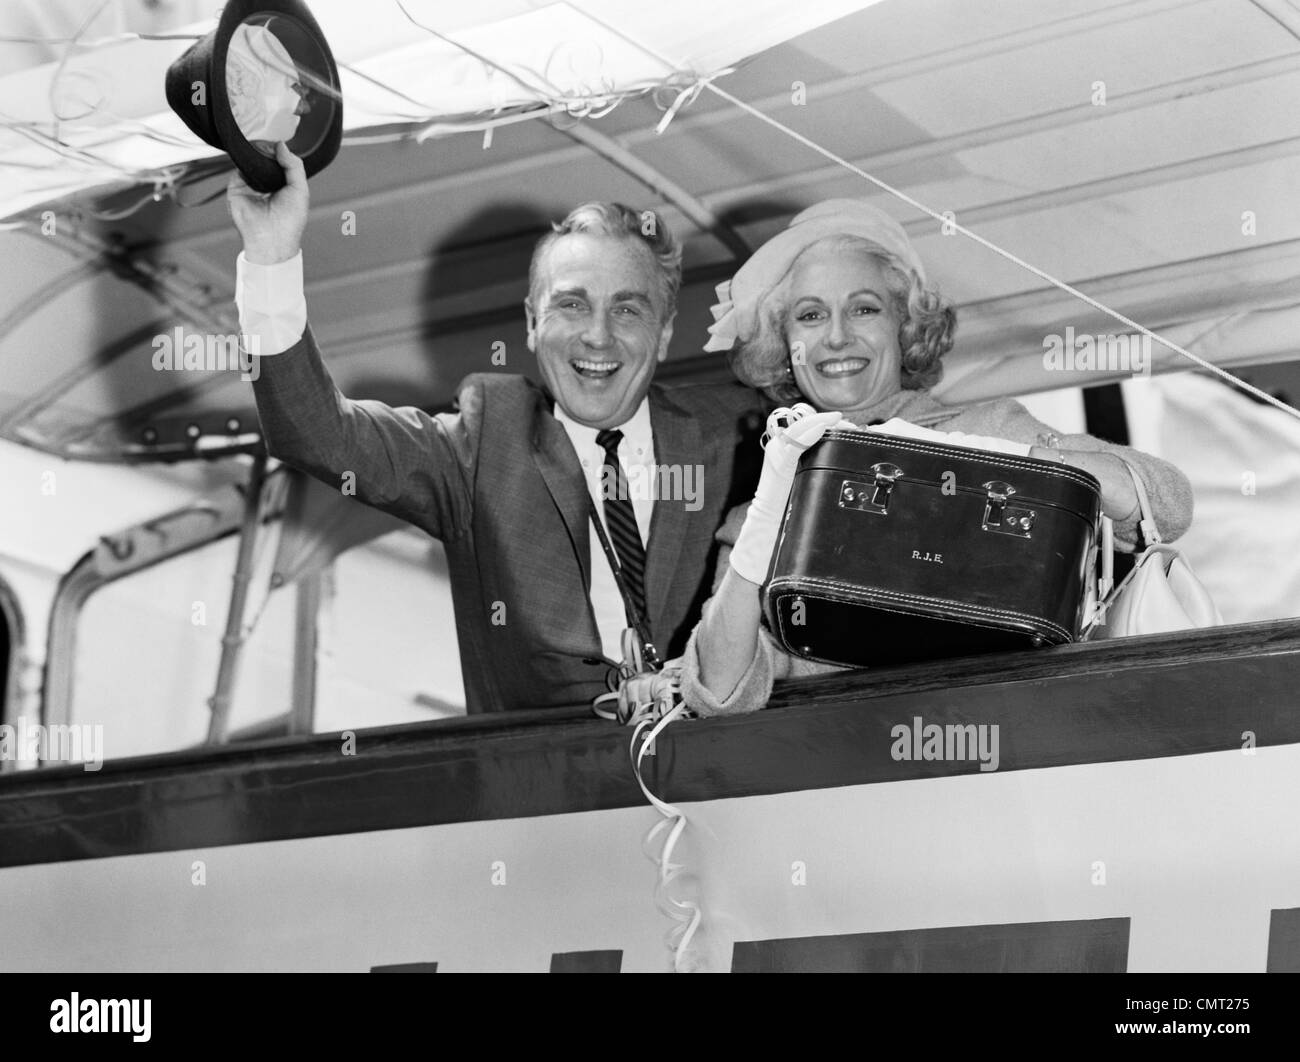 1960 ELDER COUPLE MARI ET FEMME SMILING WAVING FROM CRUISE SHIP LOOKING AT CAMERA Banque D'Images